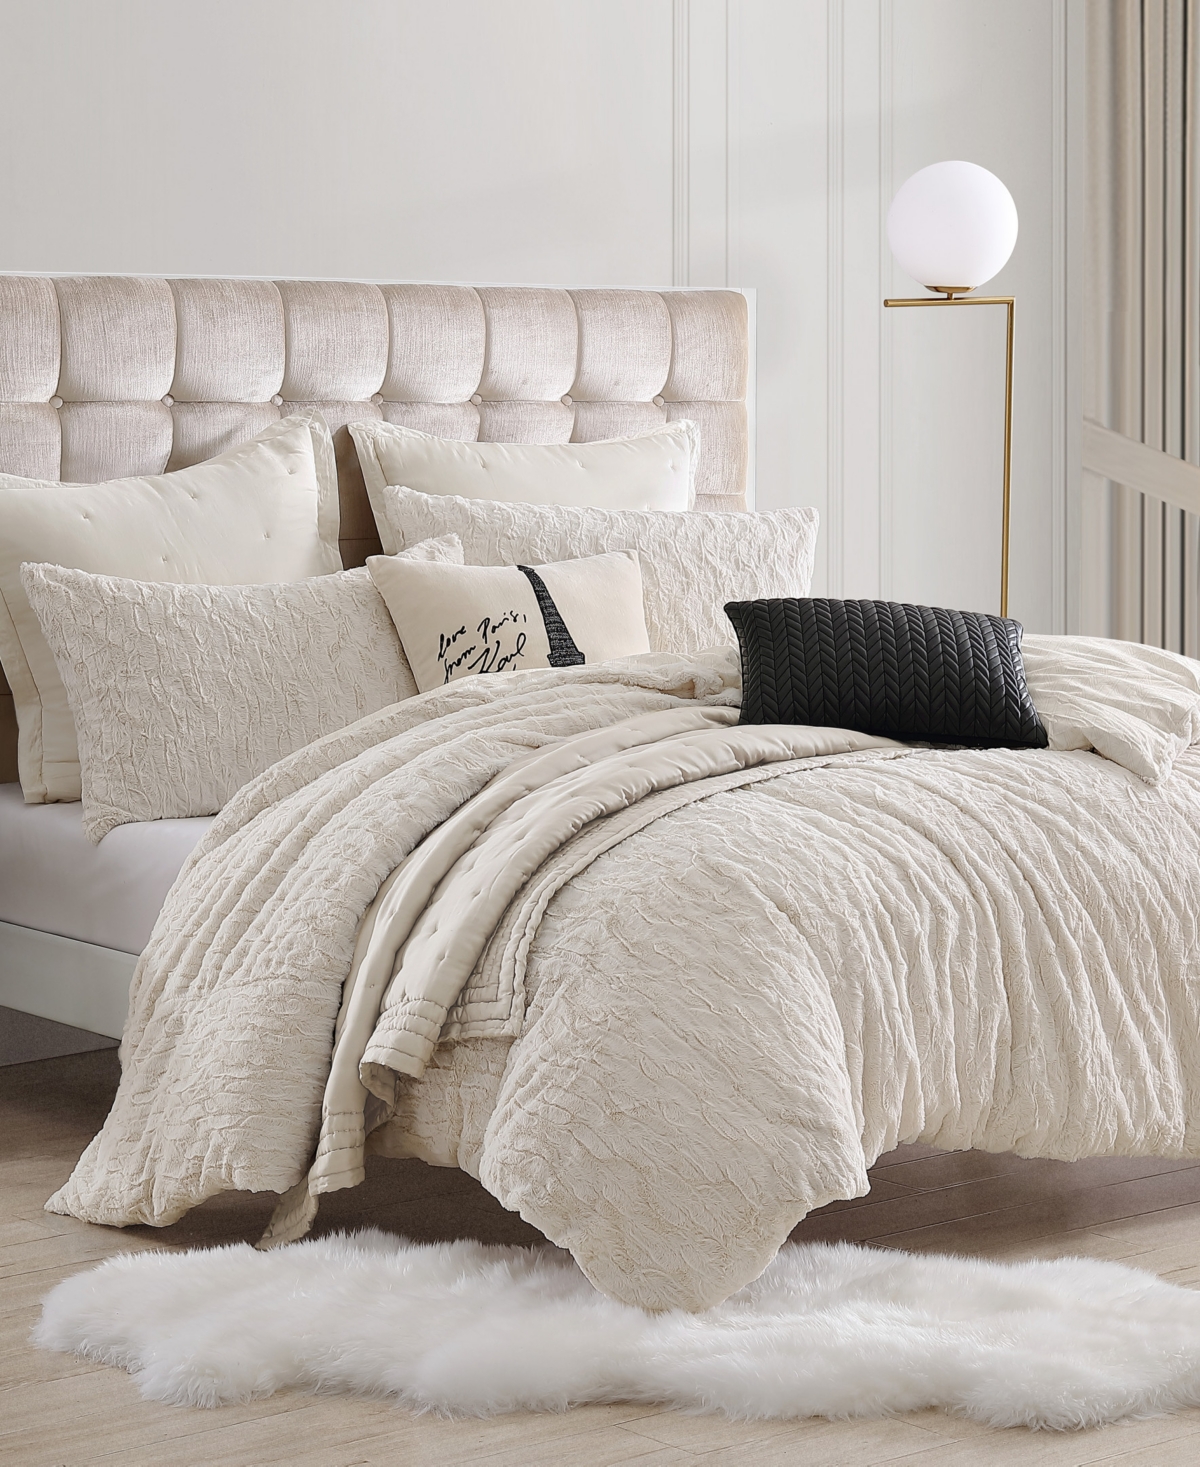 Karl Lagerfeld Soft And Warm Heavenly 3 Piece Duvet Cover Set, Full/queen Bedding In Ivory